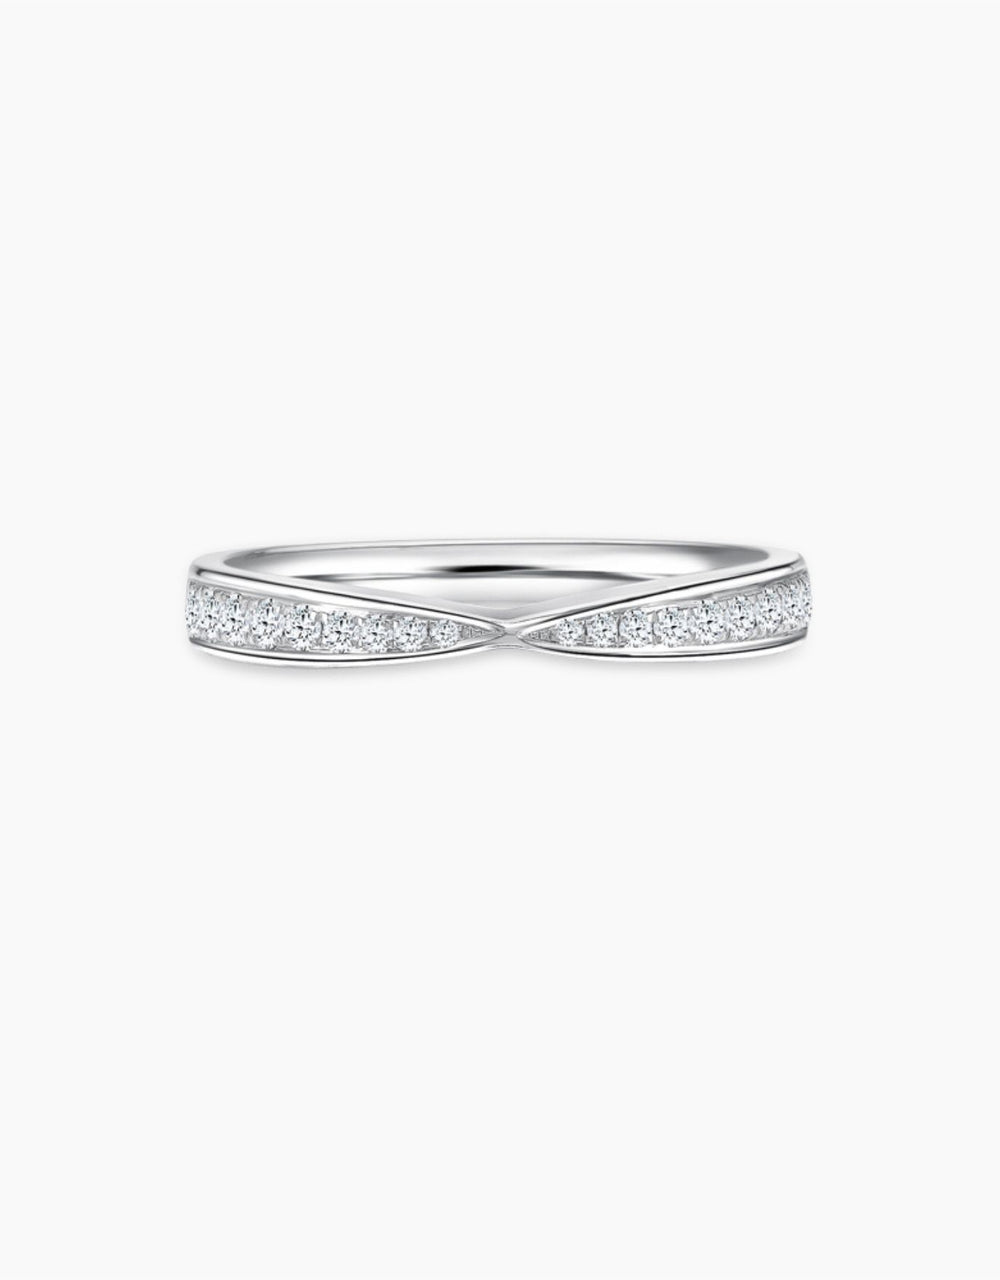 Louis Vuitton Eternite´ wedding band in white gold and